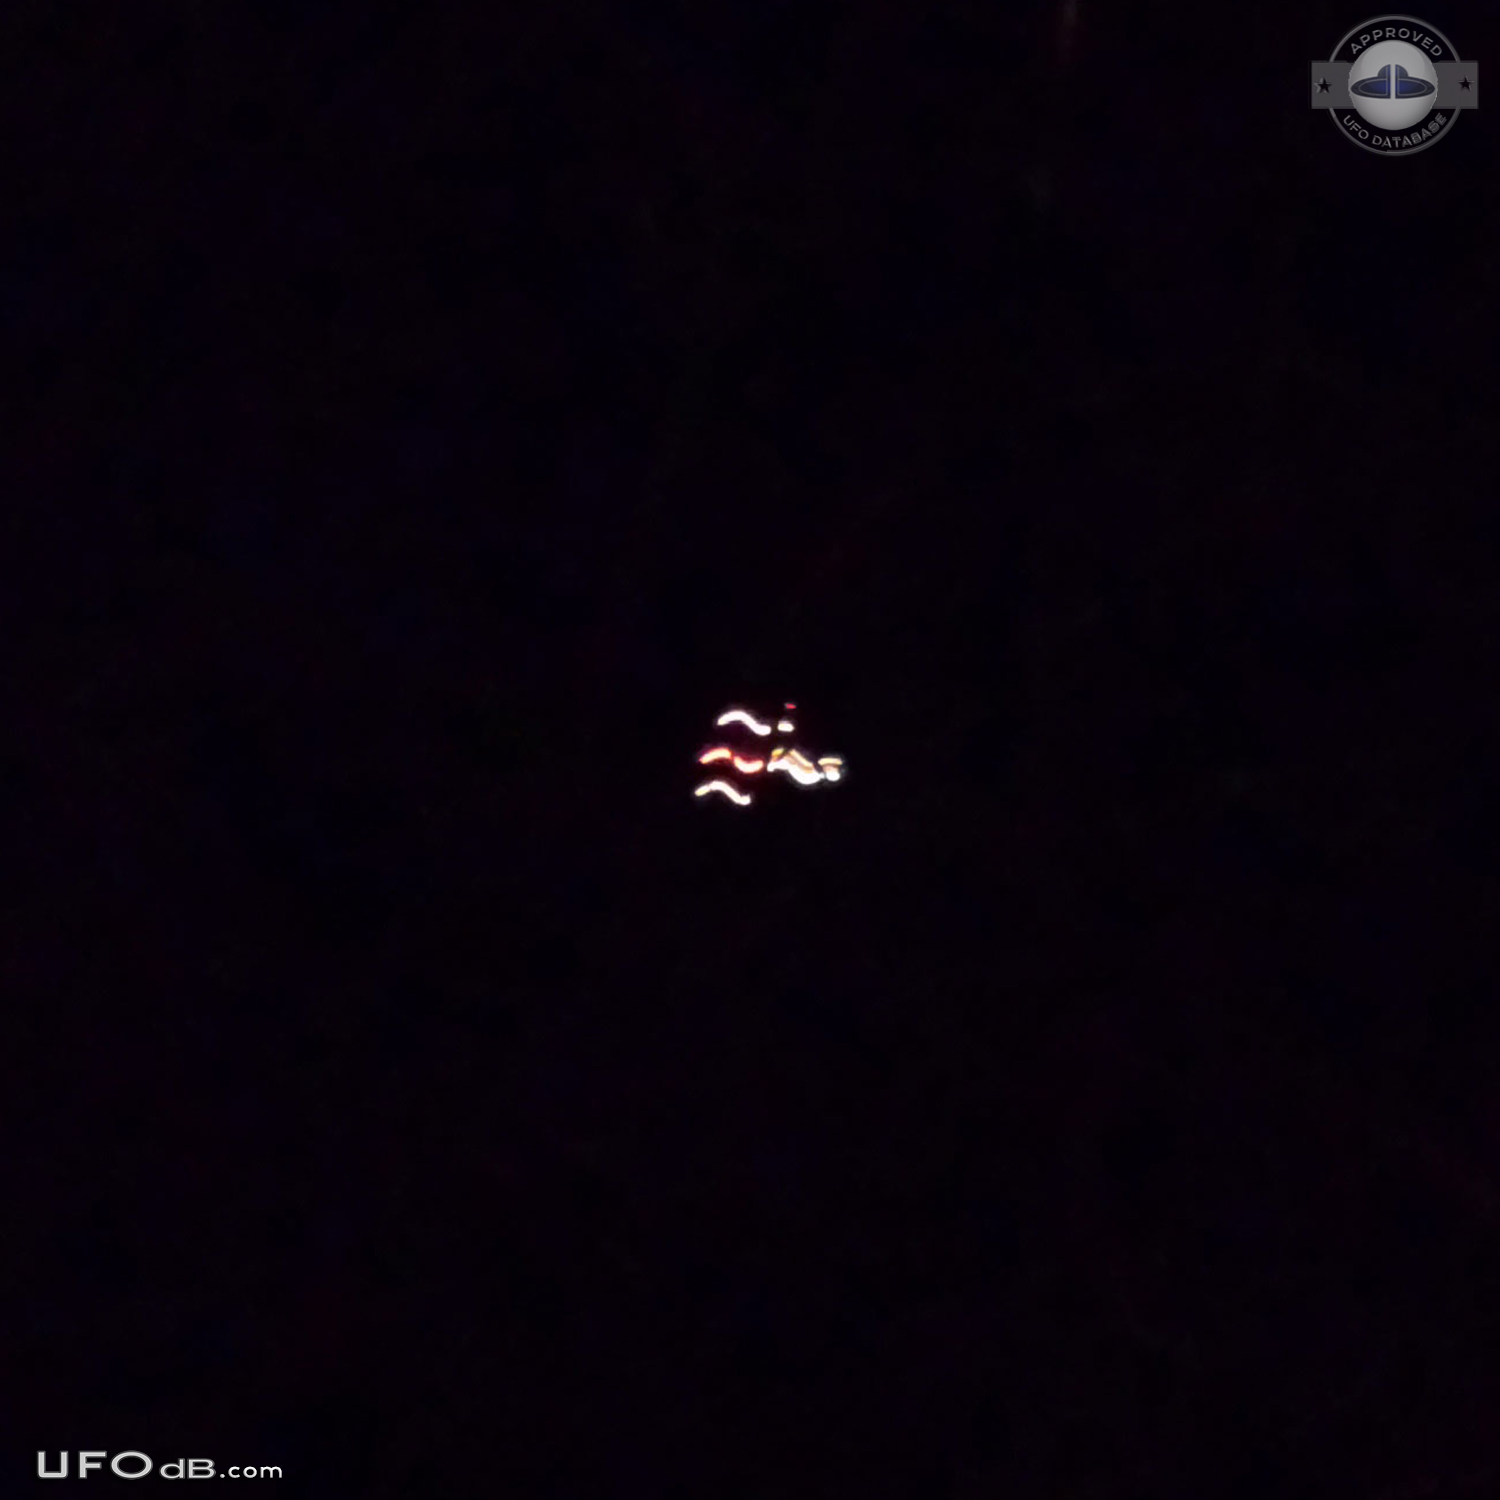 Strange object in the sky of Timmins Ontario Canada on January 22 2015 UFO Picture #581-5